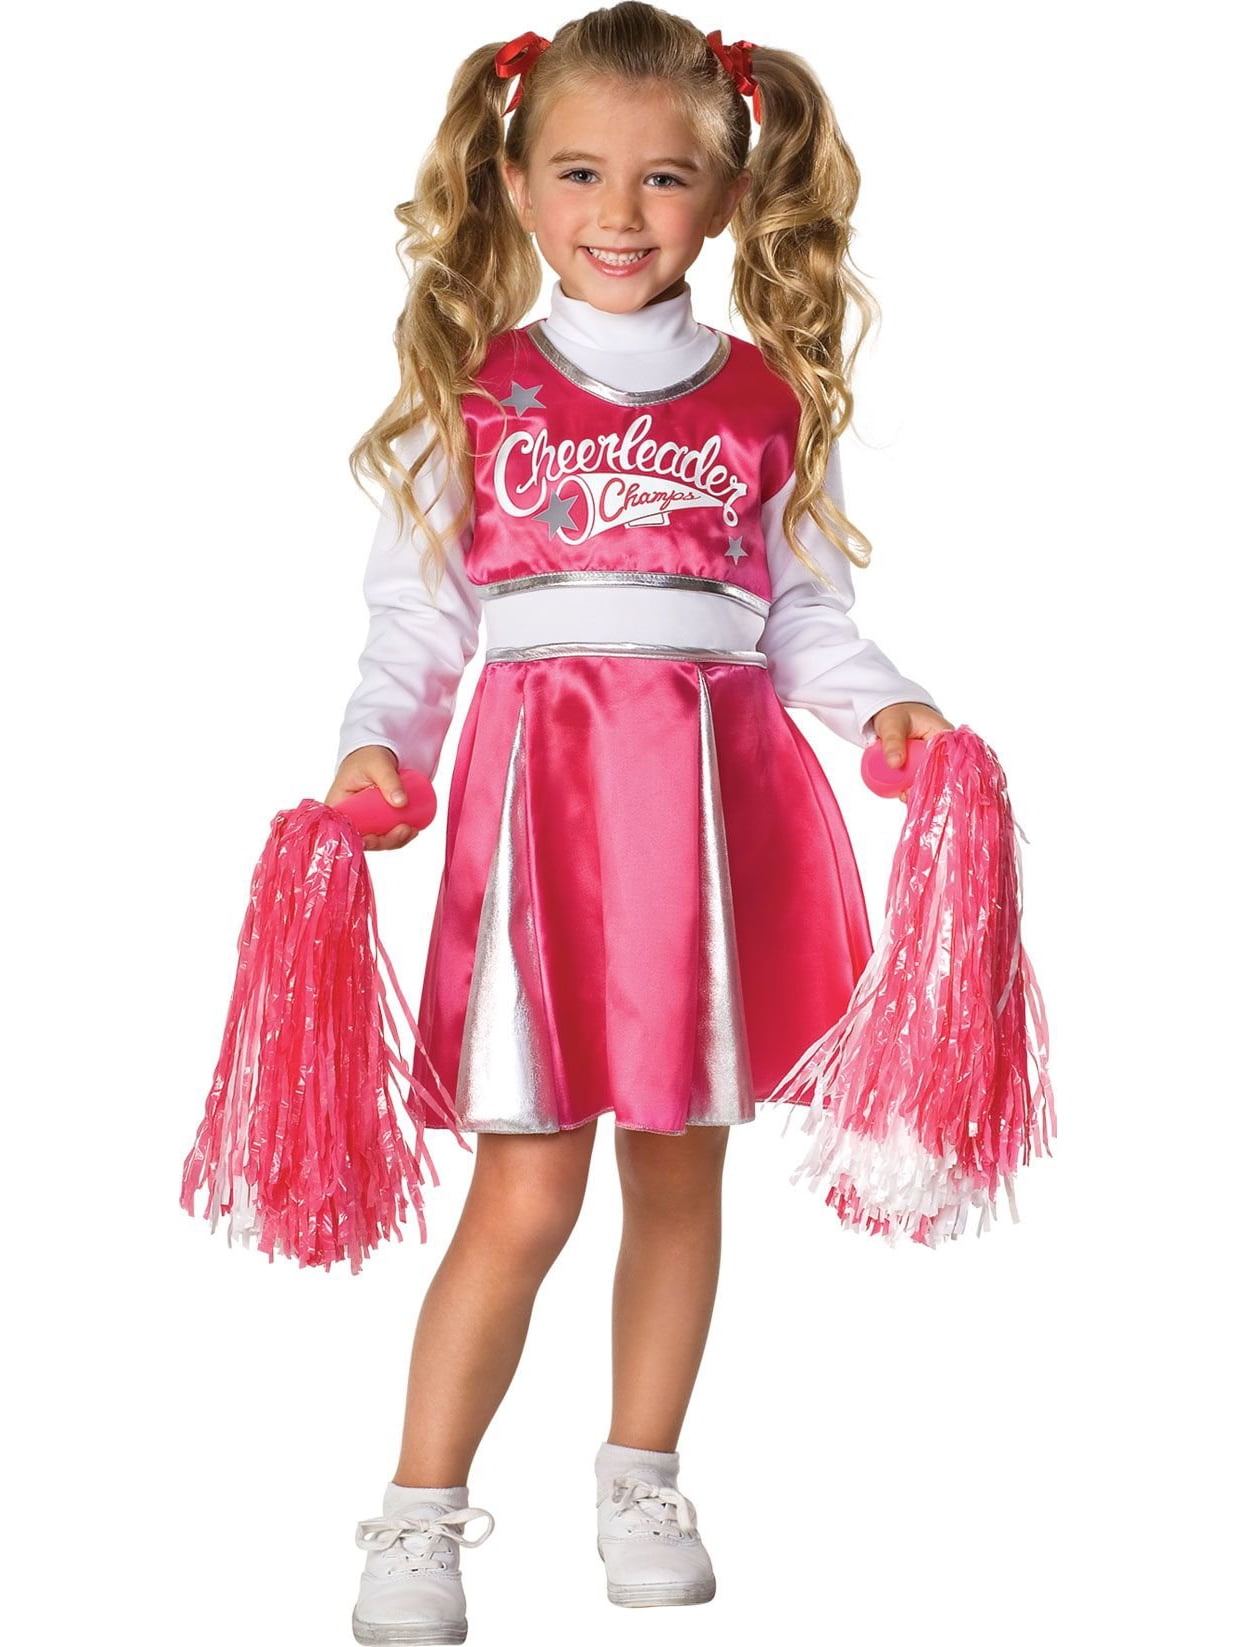 Morph Pink Cheerleader Costume with Pom Poms Girls High School Glee Outfit  Halloween Pink S 